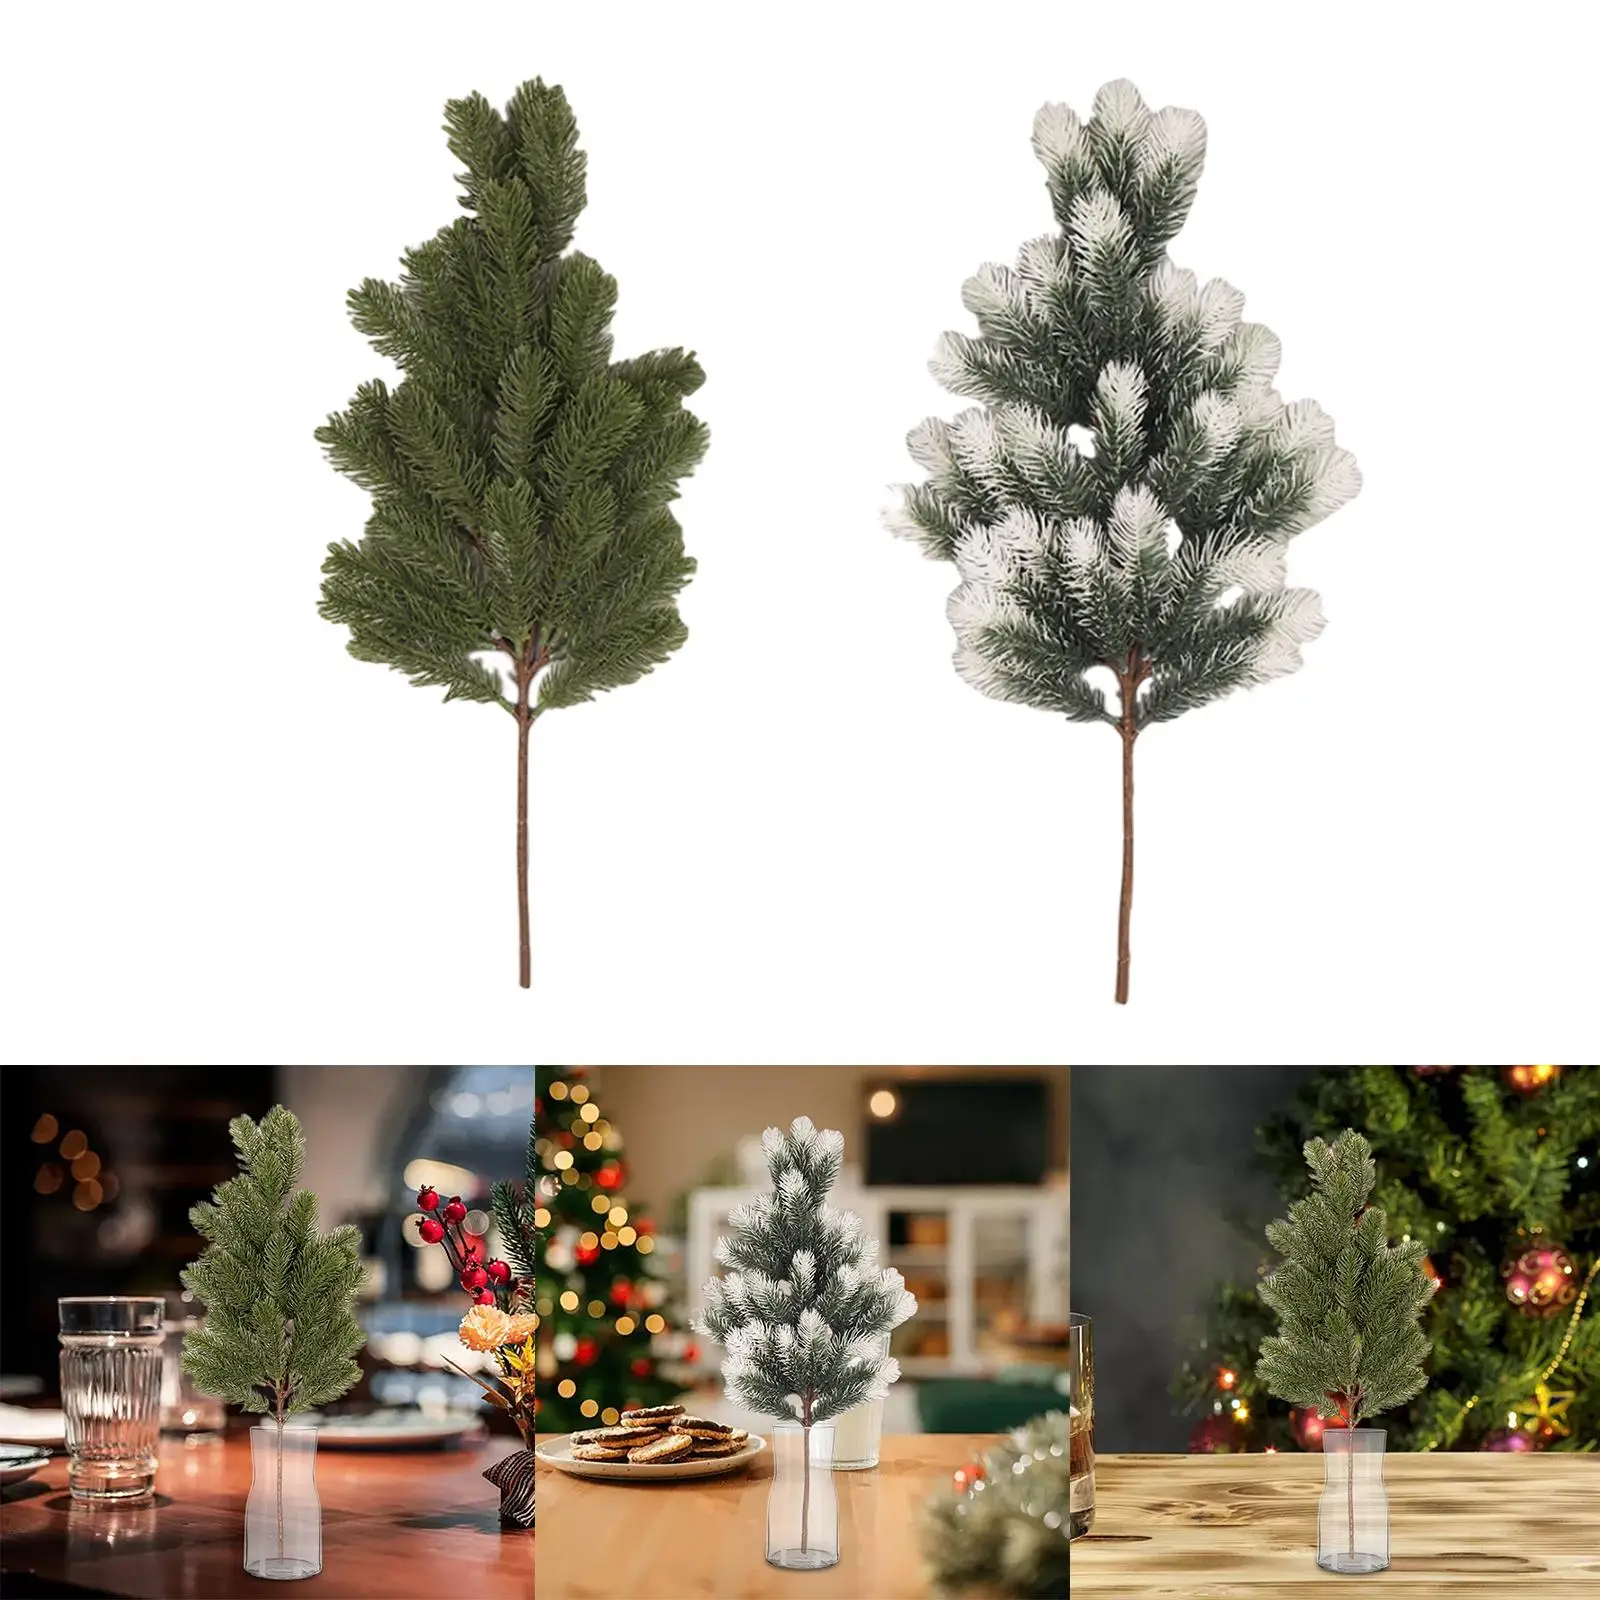 Artificial Branches Branch Accessories for Christmas DIY Craft Office Home Events Decor